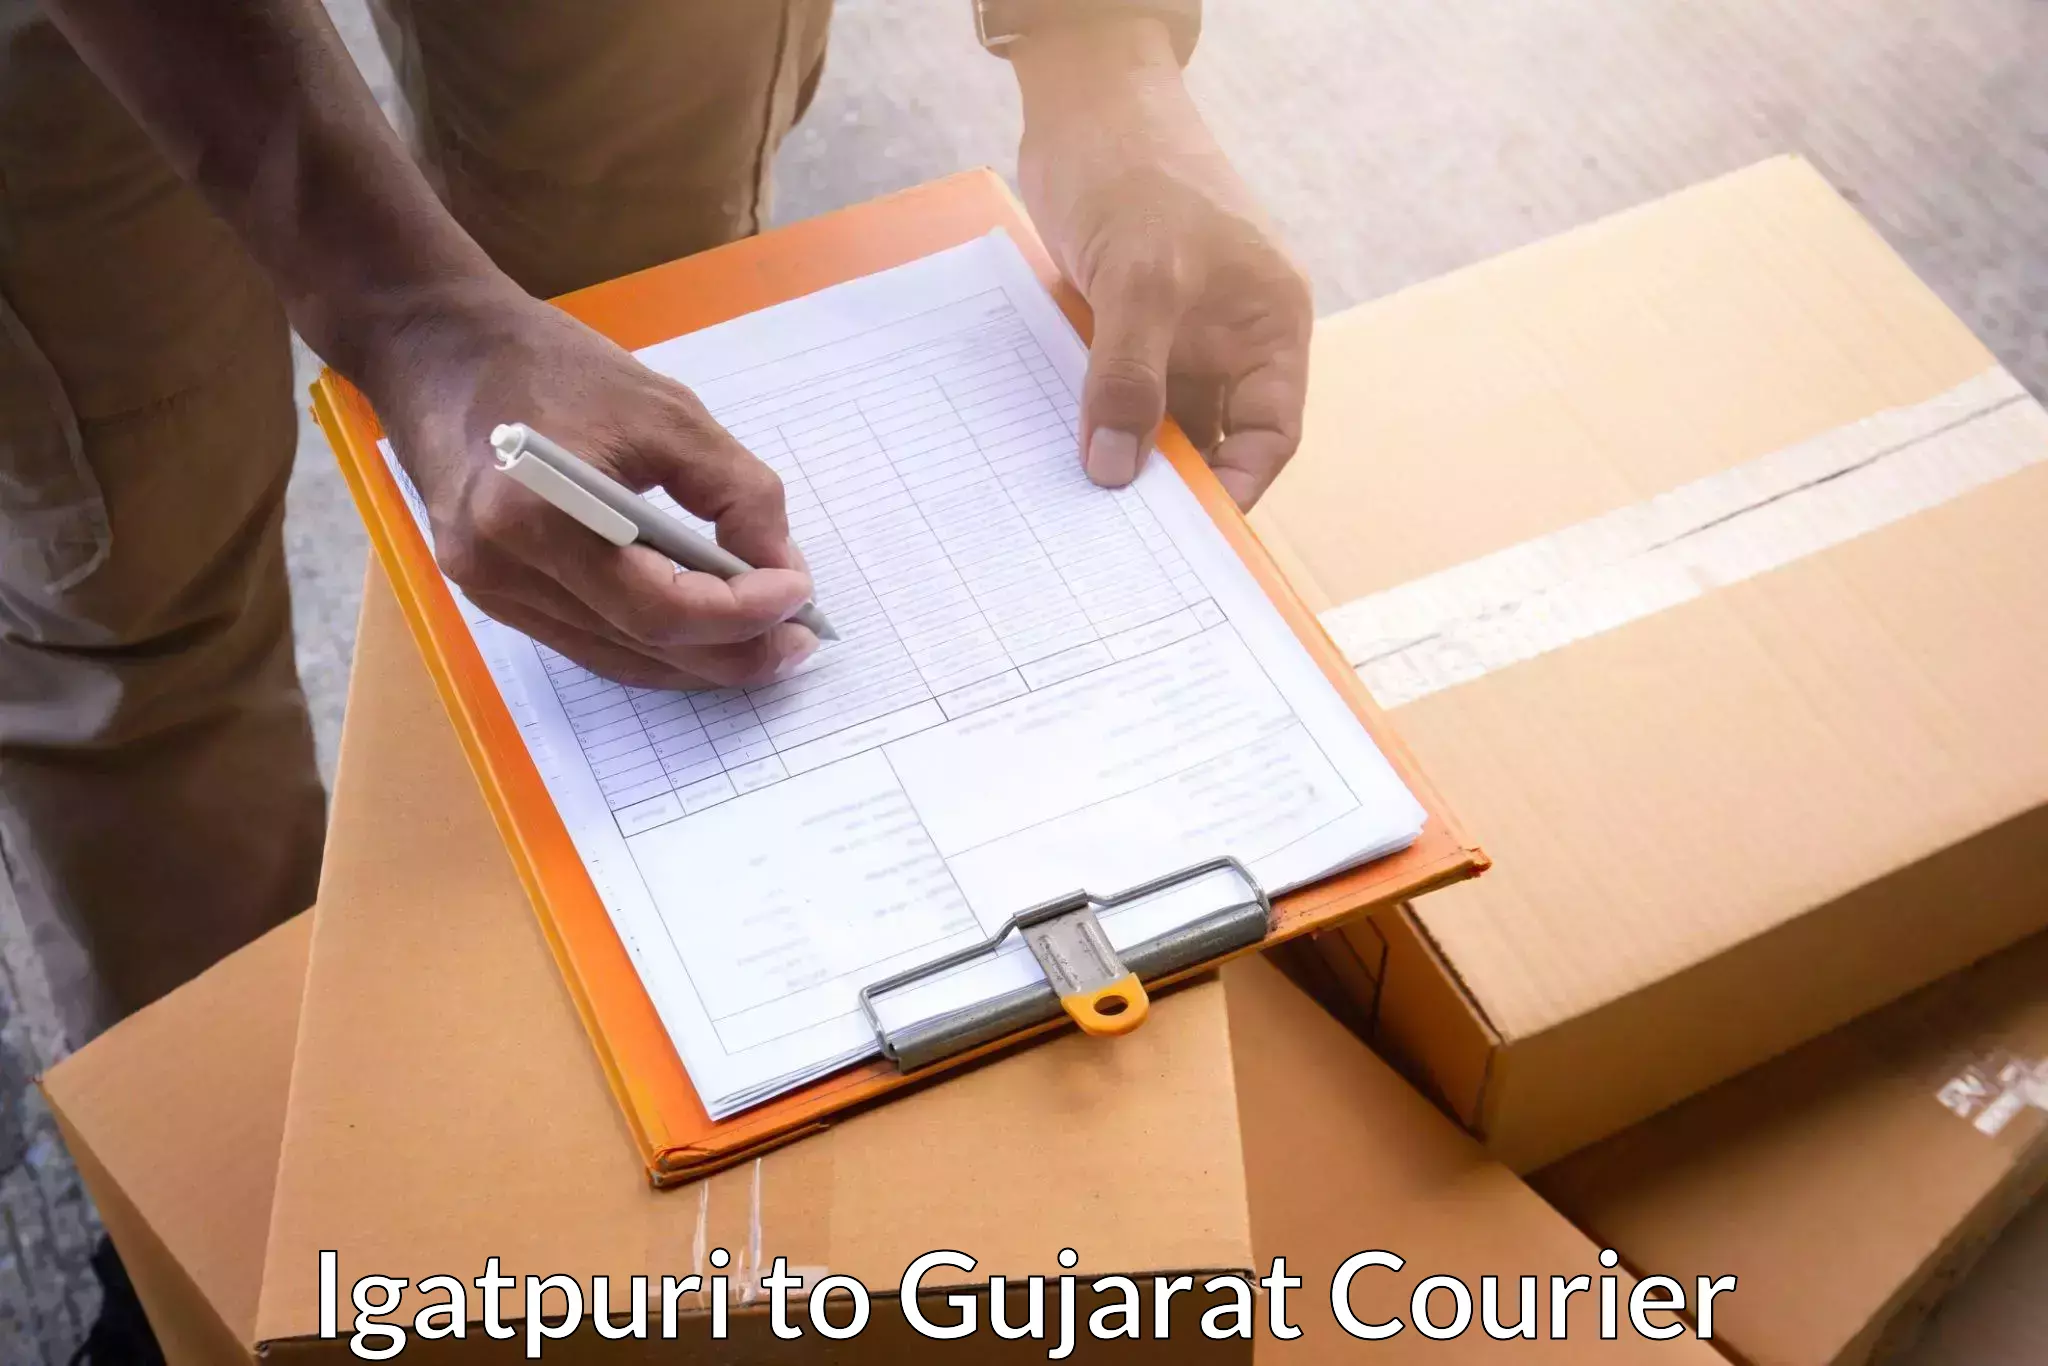 Air courier services Igatpuri to Dholera